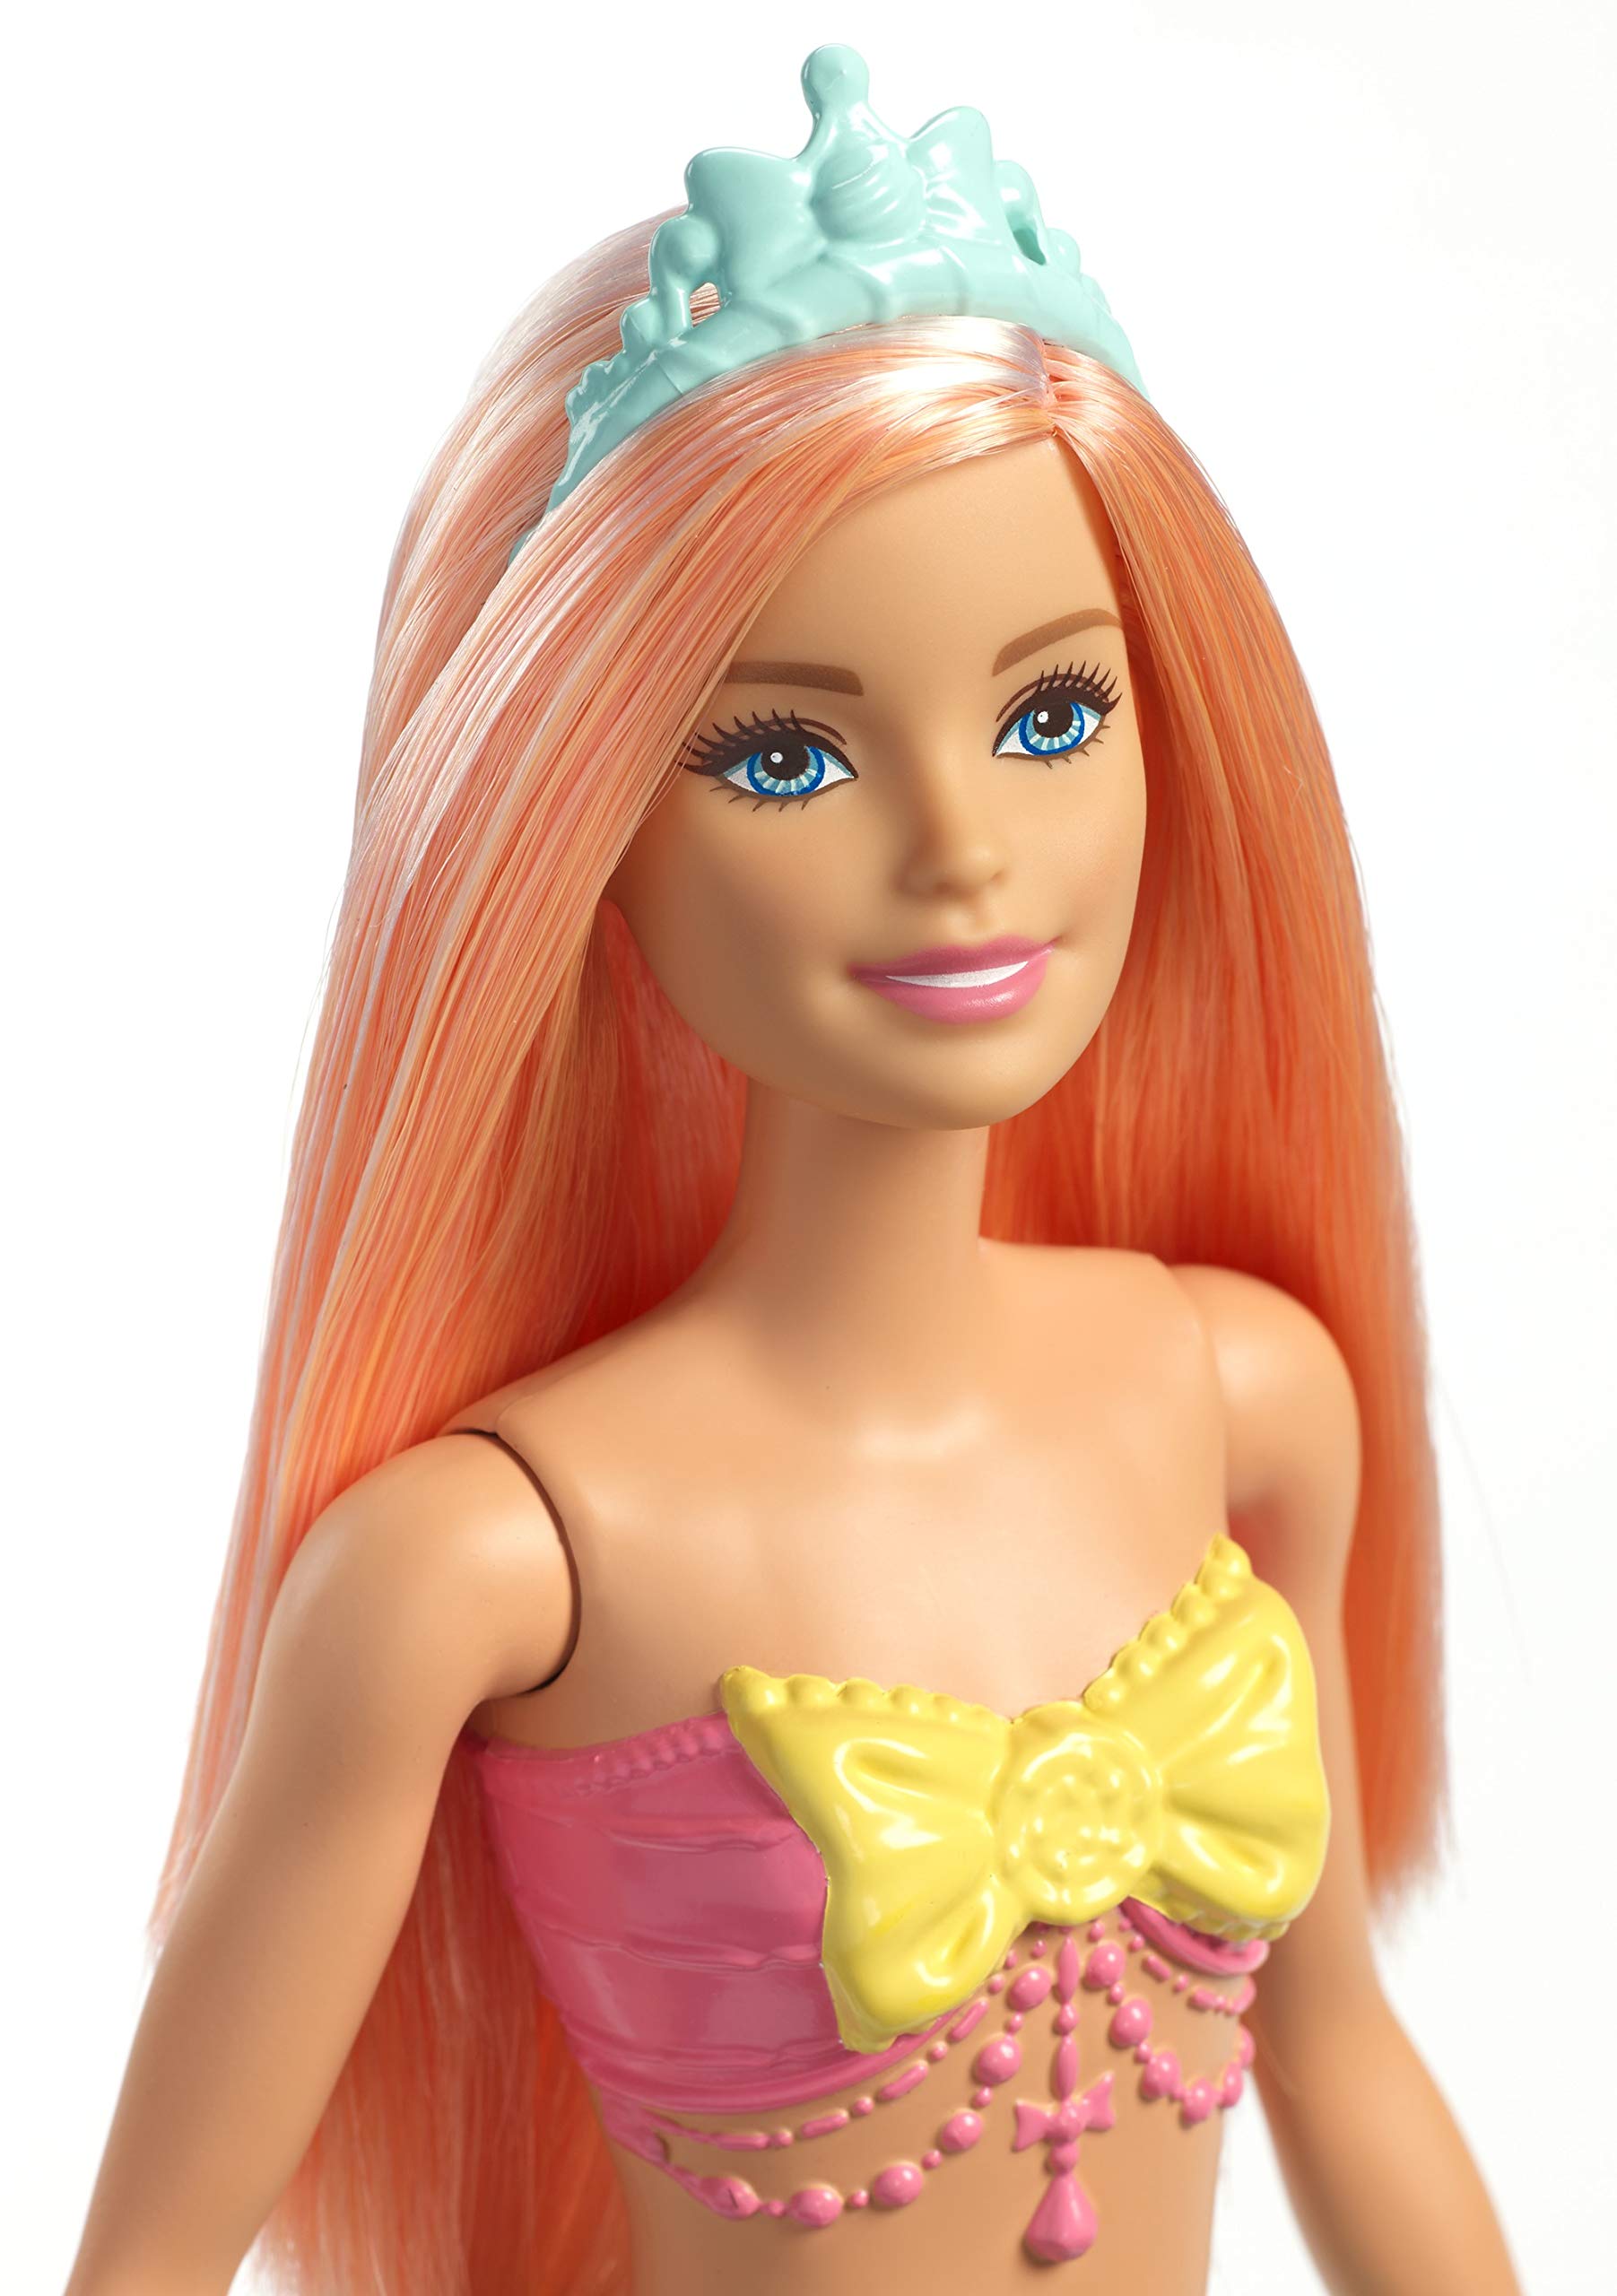 Barbie Dreamtopia Mermaid Doll, approx. 12-inch, Rainbow Tail, Coral Hair, for 3 to 7 Year Olds​​​